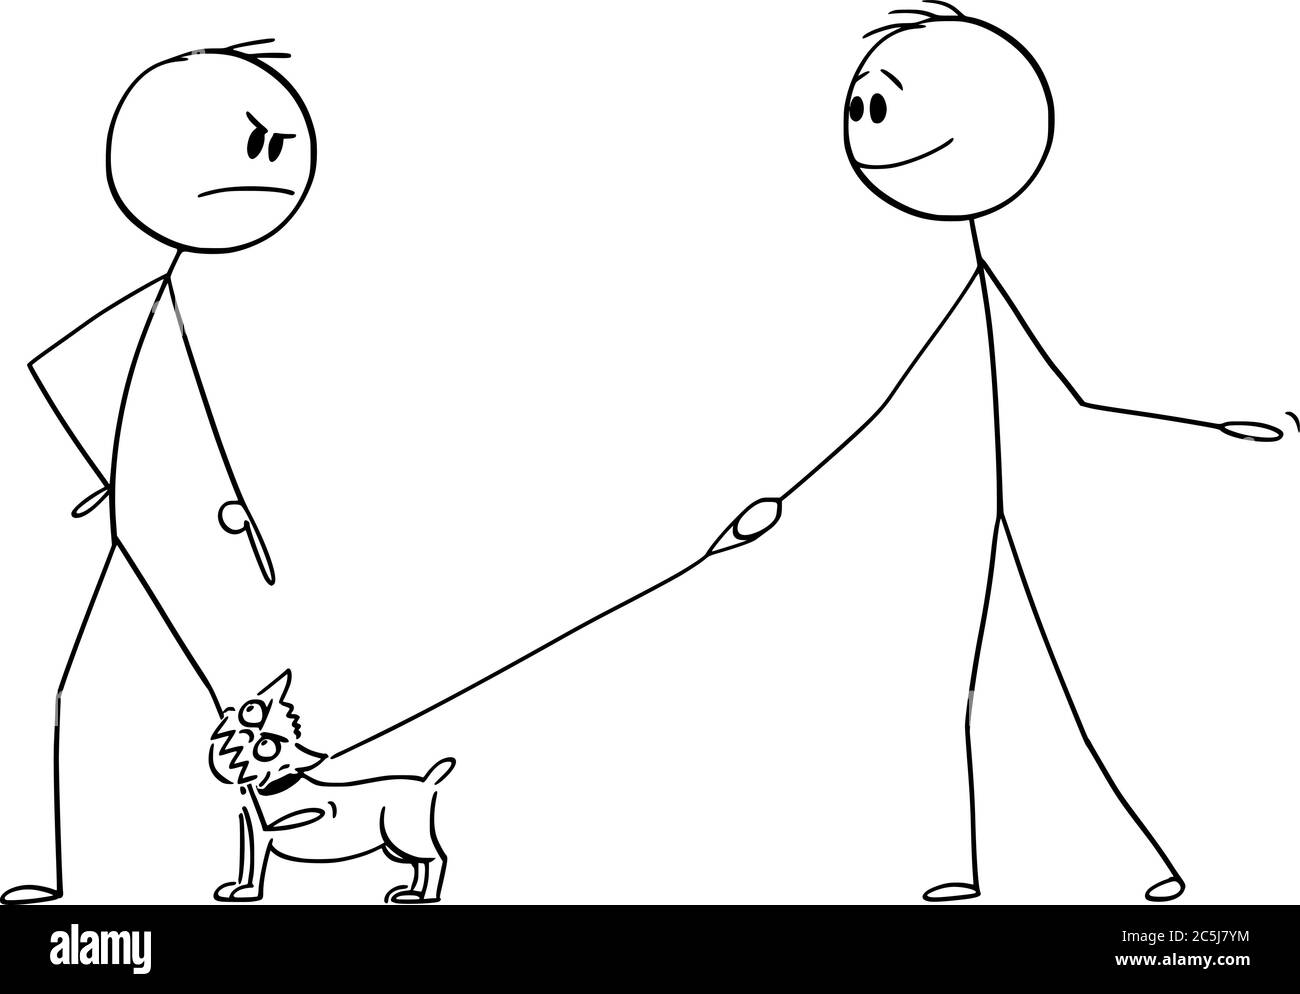 Vector cartoon stick figure drawing conceptual illustration of angry man with small aggressive dog or chihuahua on the leash or lead bite to his leg. Owner is smiling. Stock Vector